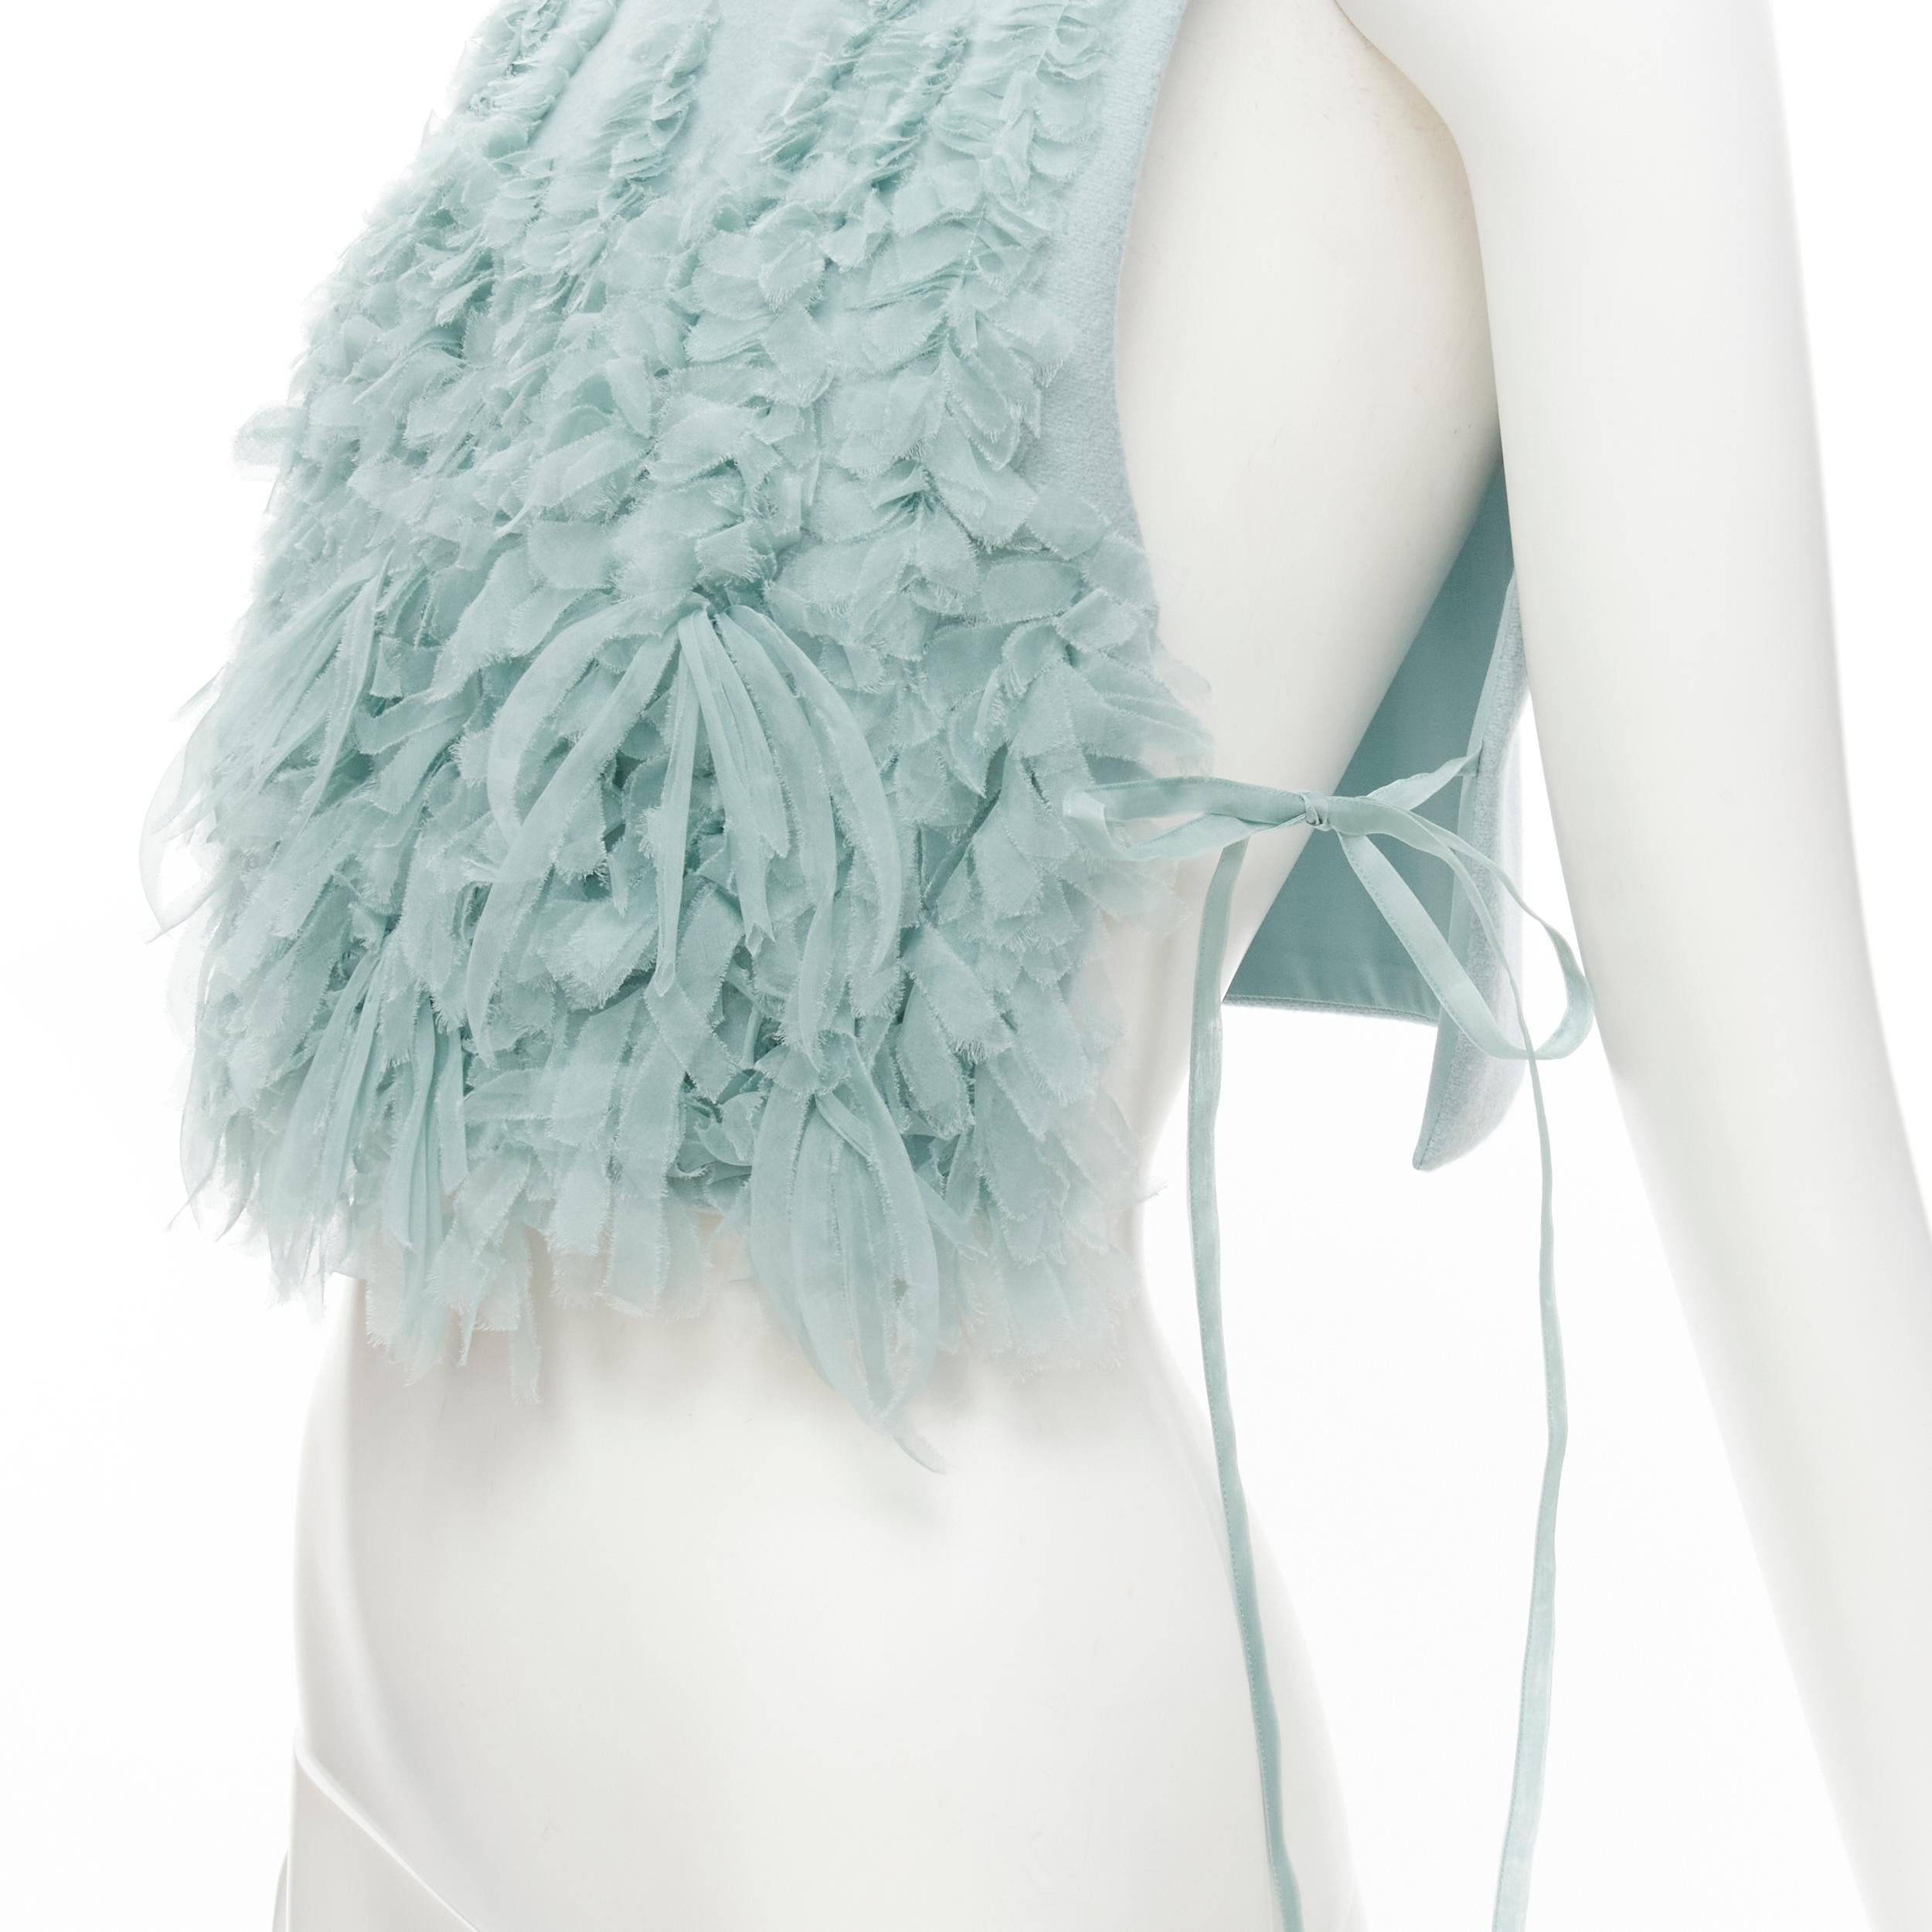 RUBAN Russia 100% wool light blue silk ruffle petal tie side cropped vest top XS 
Reference: LNKO/A01857 
Brand: Ruban Atelier 
Material: Wool 
Color: Blue 
Pattern: Solid 
Closure: Tie 
Extra Detail: Ribbon ties at sides. 
Made in: Russia